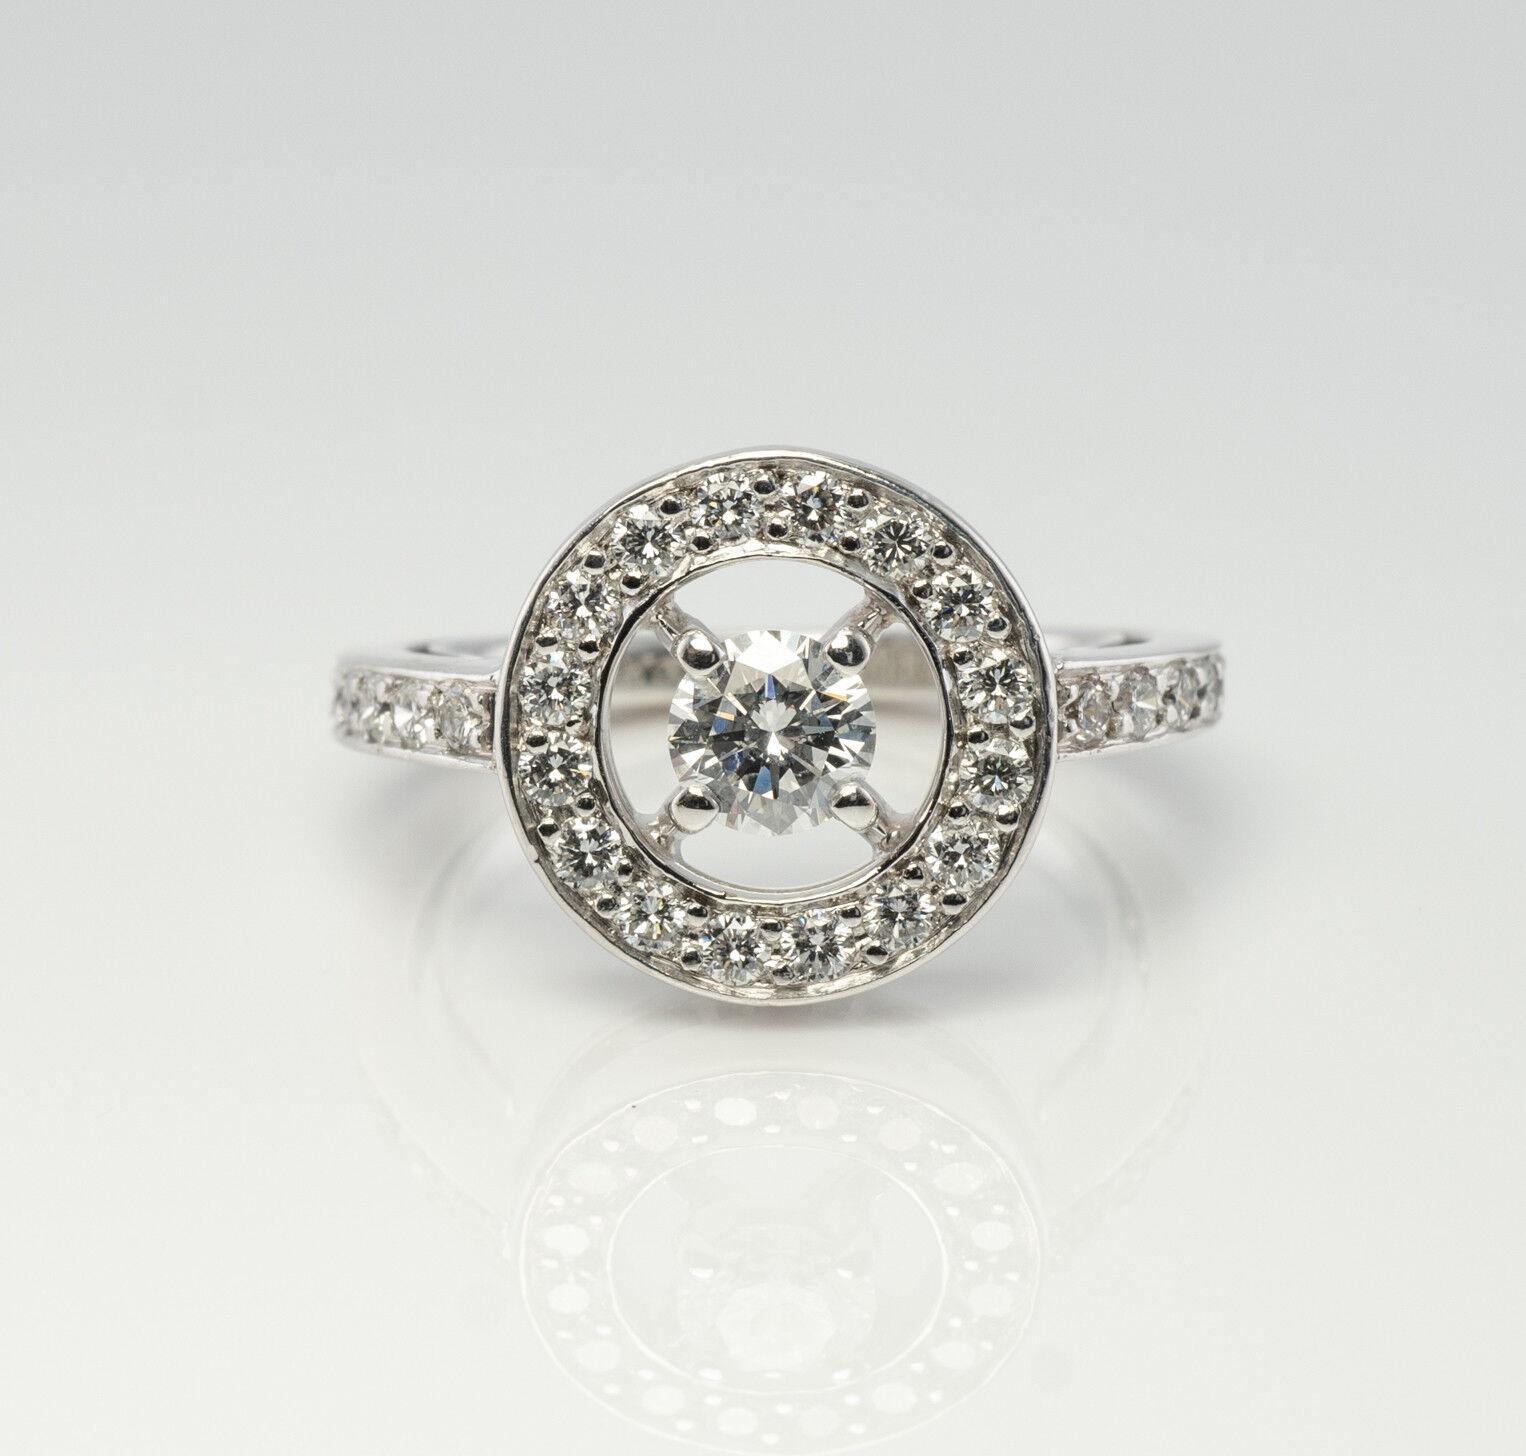 Authentic Boucheron Ring, Diamond Ring, solid 18K White Gold Ring, Circle Ring. The serial number is PRG29652, size 50, 15.92mm. The center round brilliant cut diamond is .25 carat, and thirty-four smaller diamonds add .51 carat to the total weight.